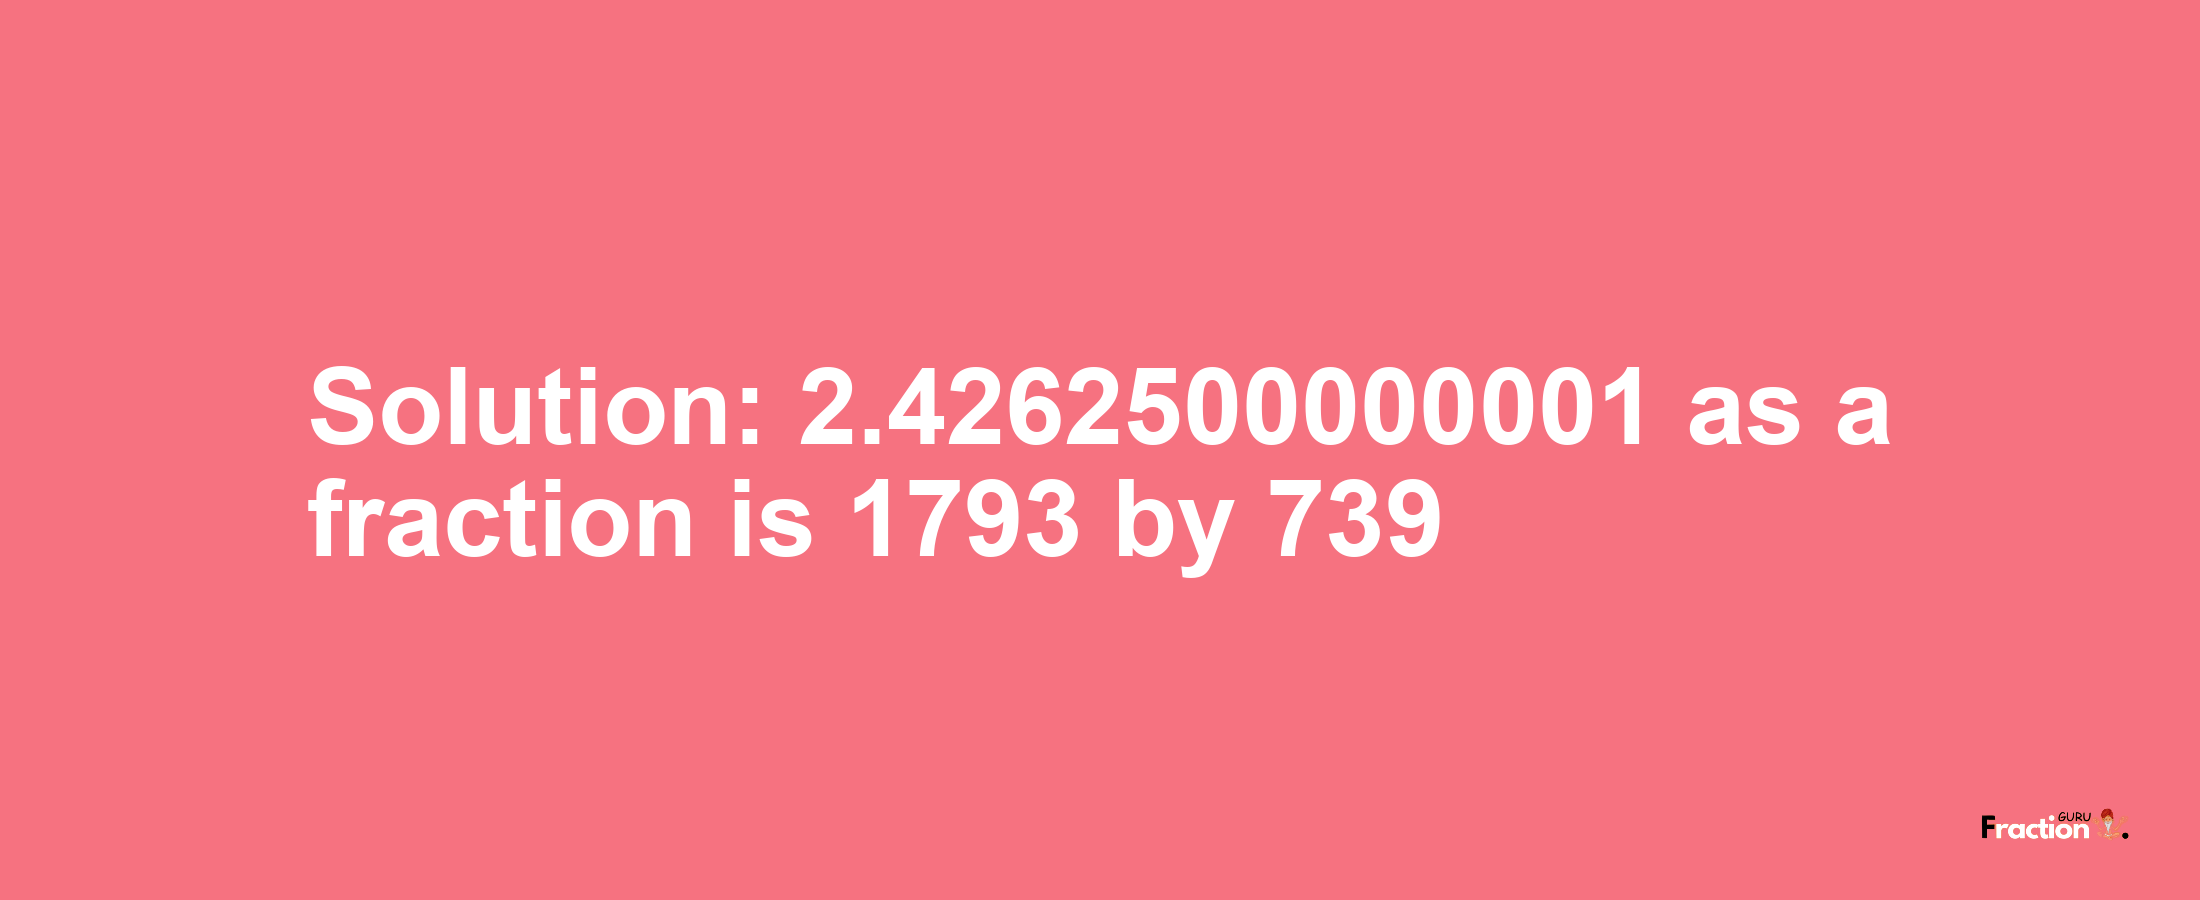 Solution:2.4262500000001 as a fraction is 1793/739